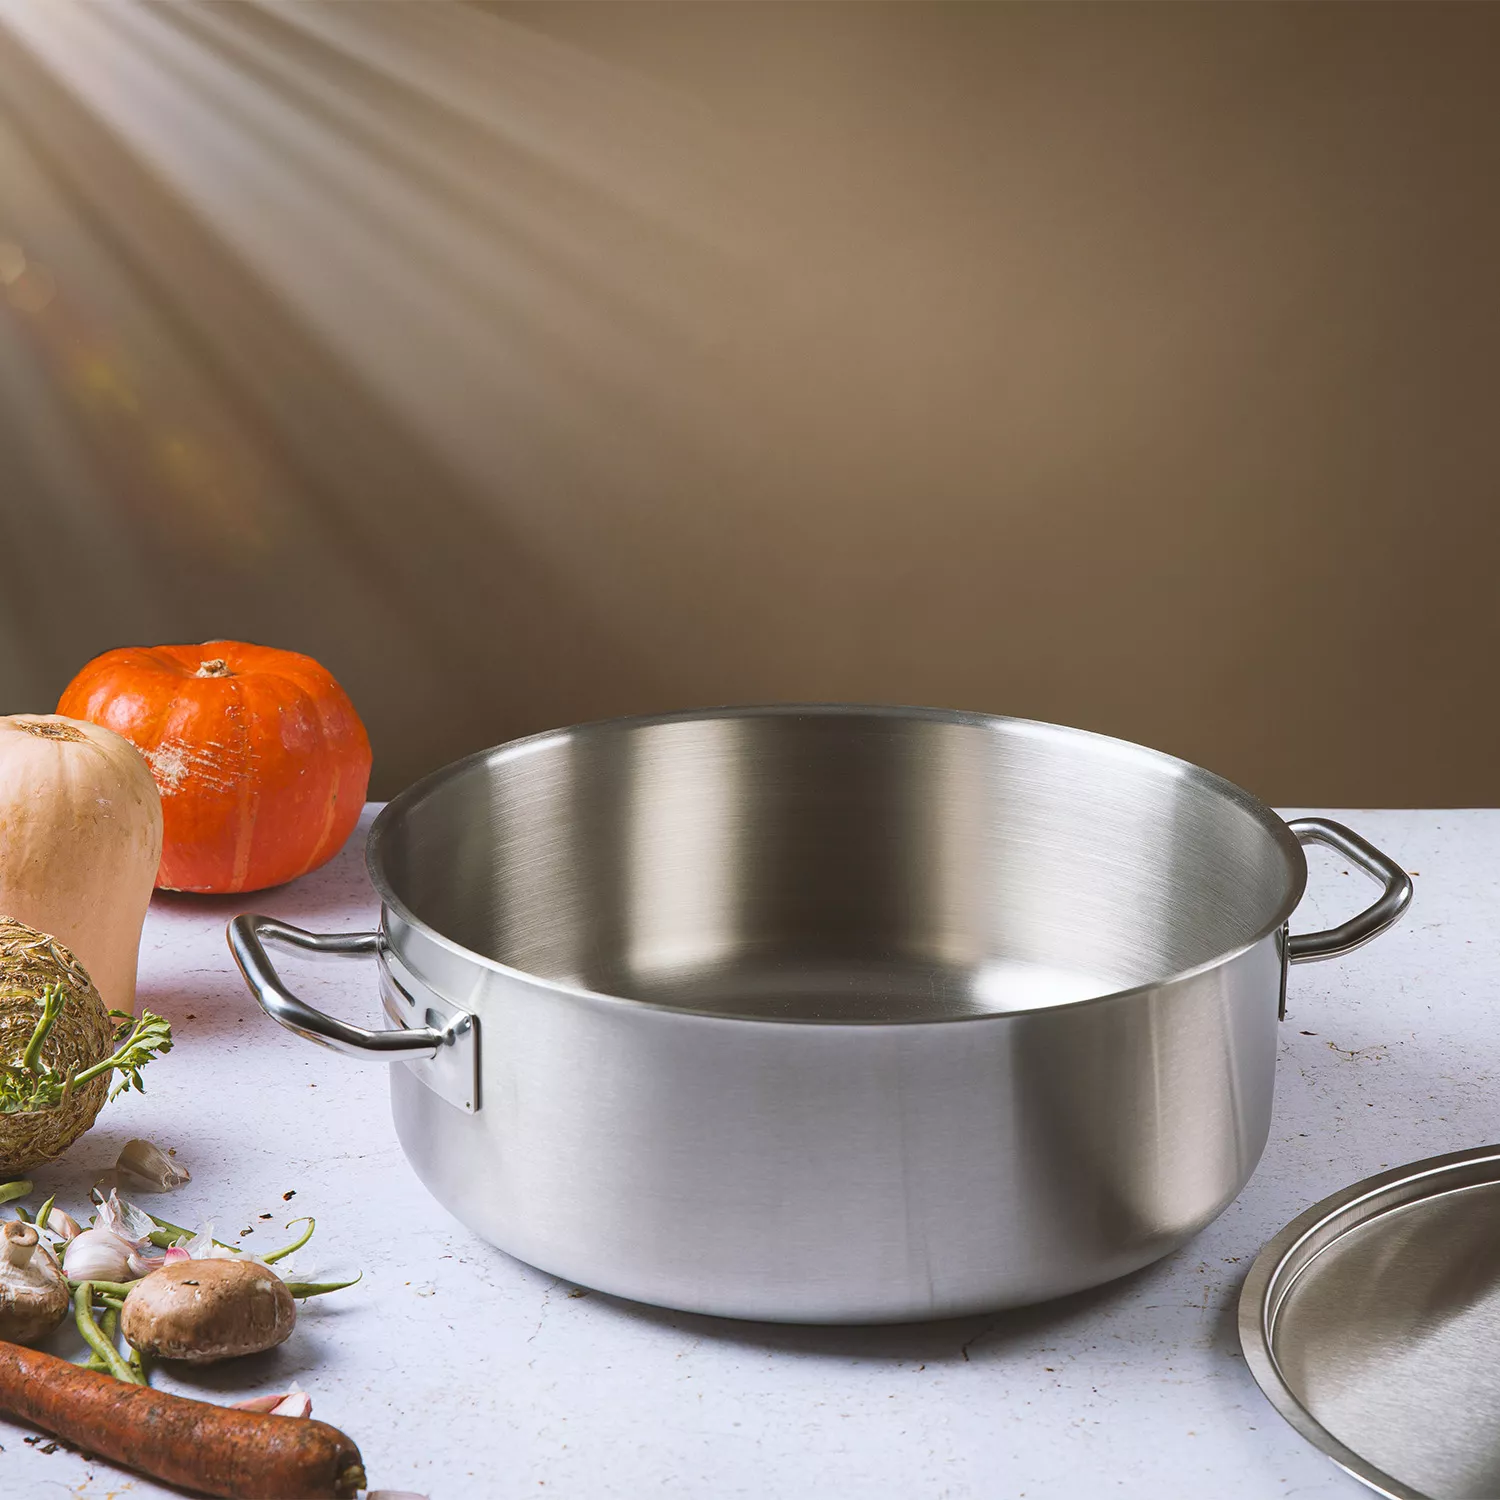 4.5 Qt. Tri-Ply Stainless Steel Rondeau with Lid, Le Creuset